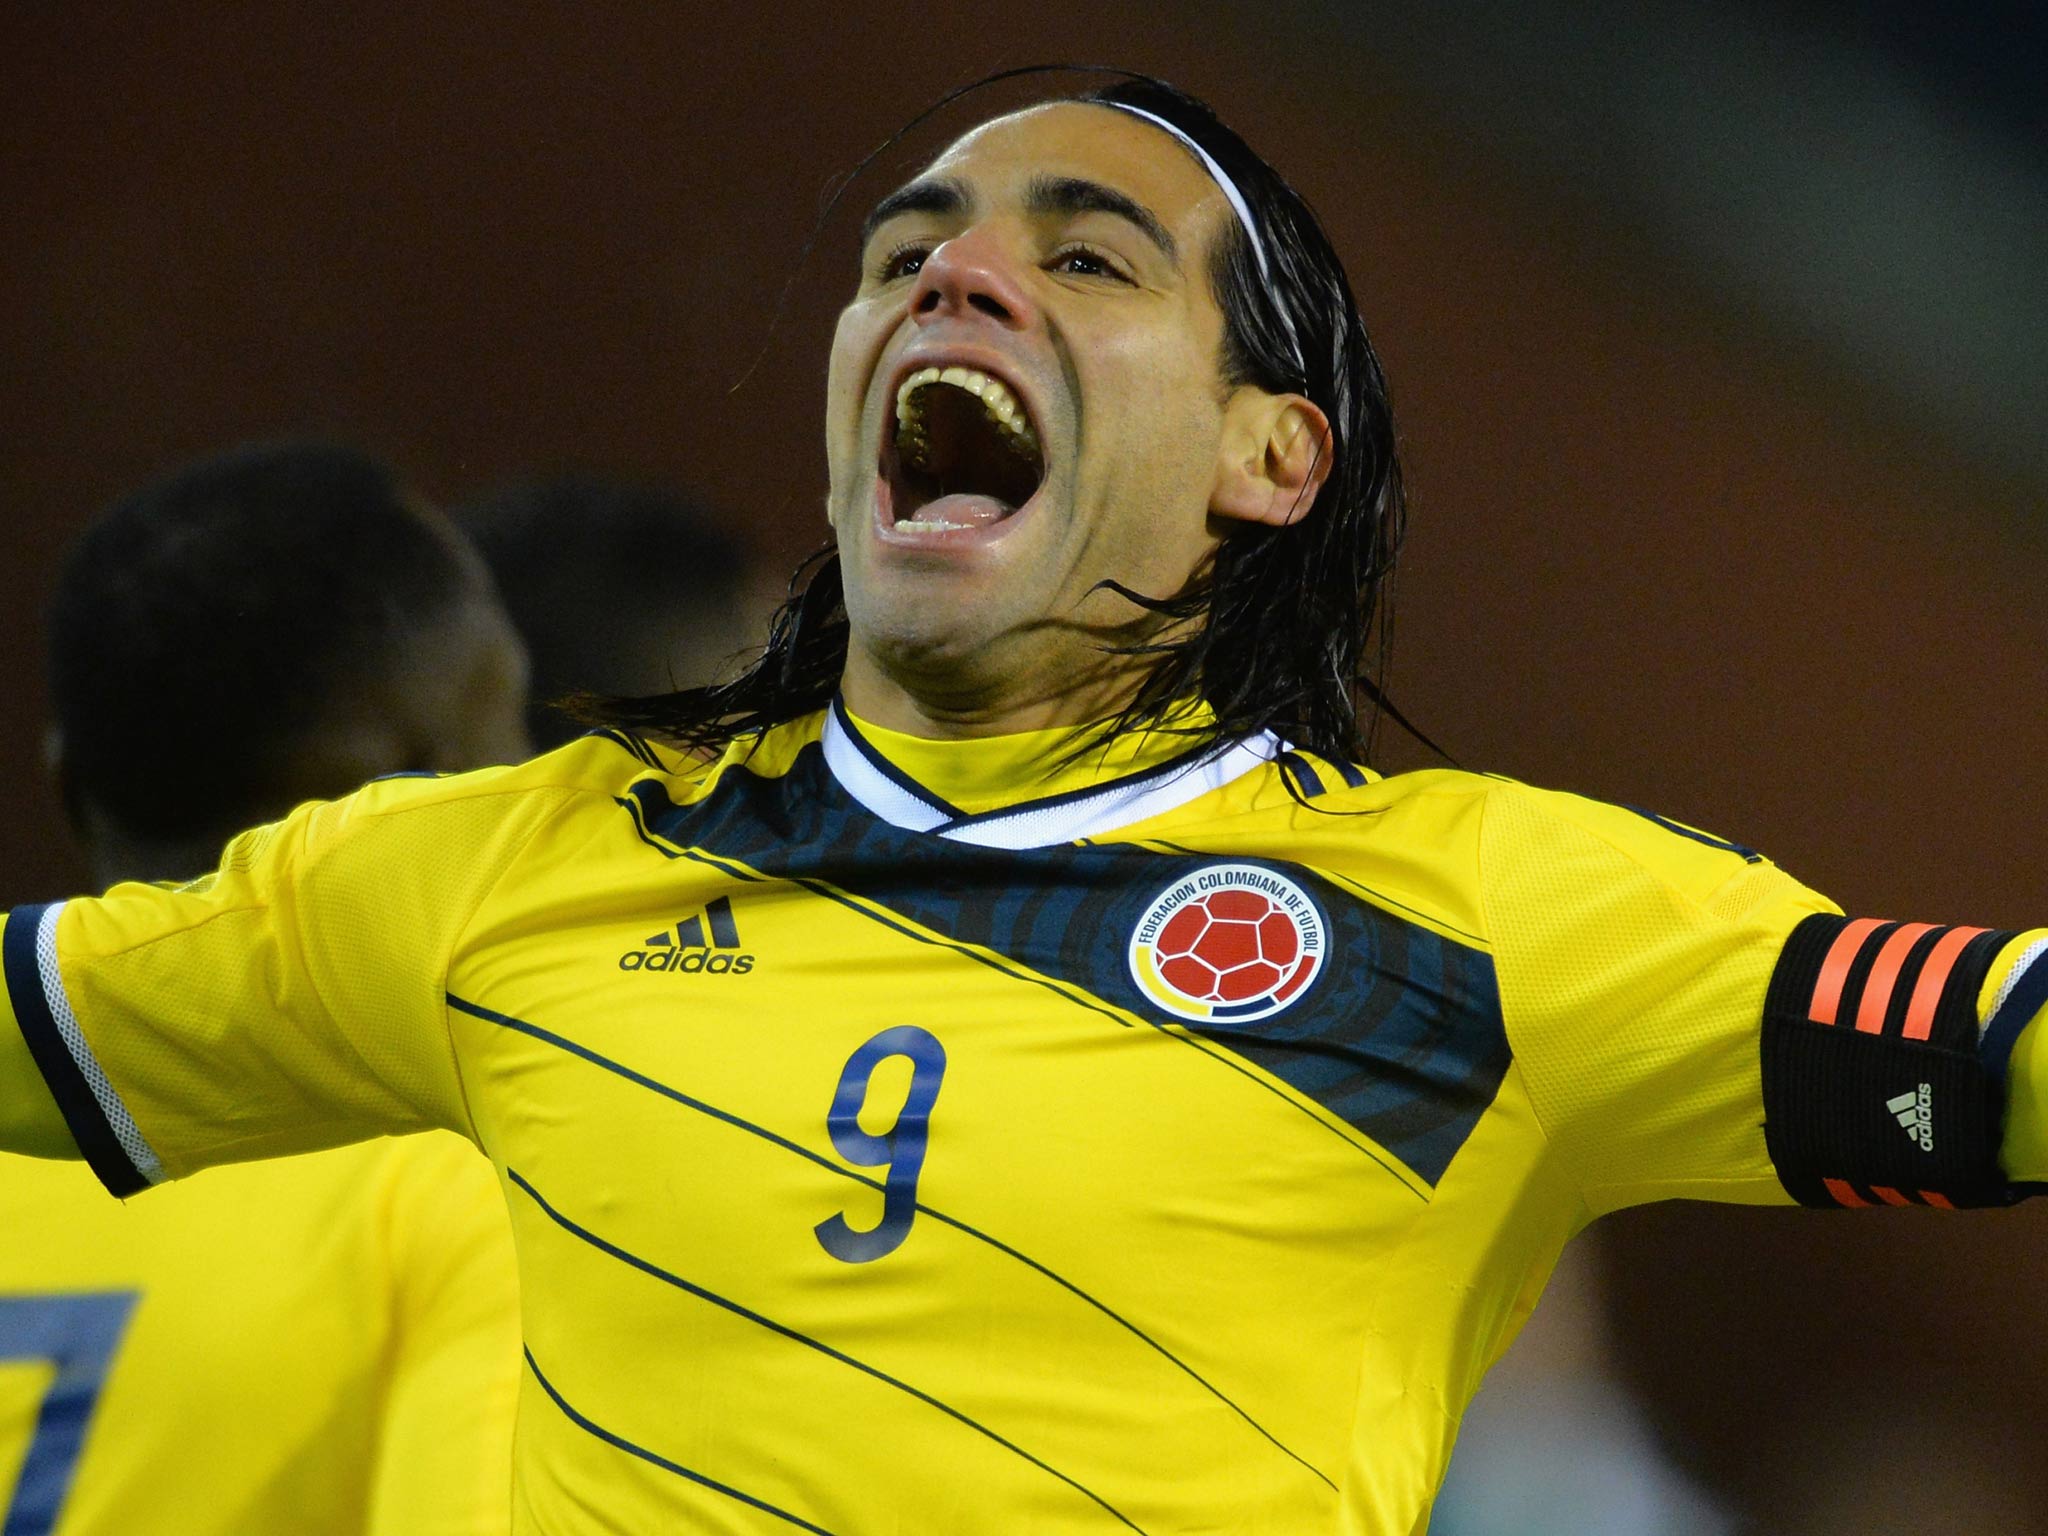 Has Radamel Falcao hinted that he wants to join Real Madrid?